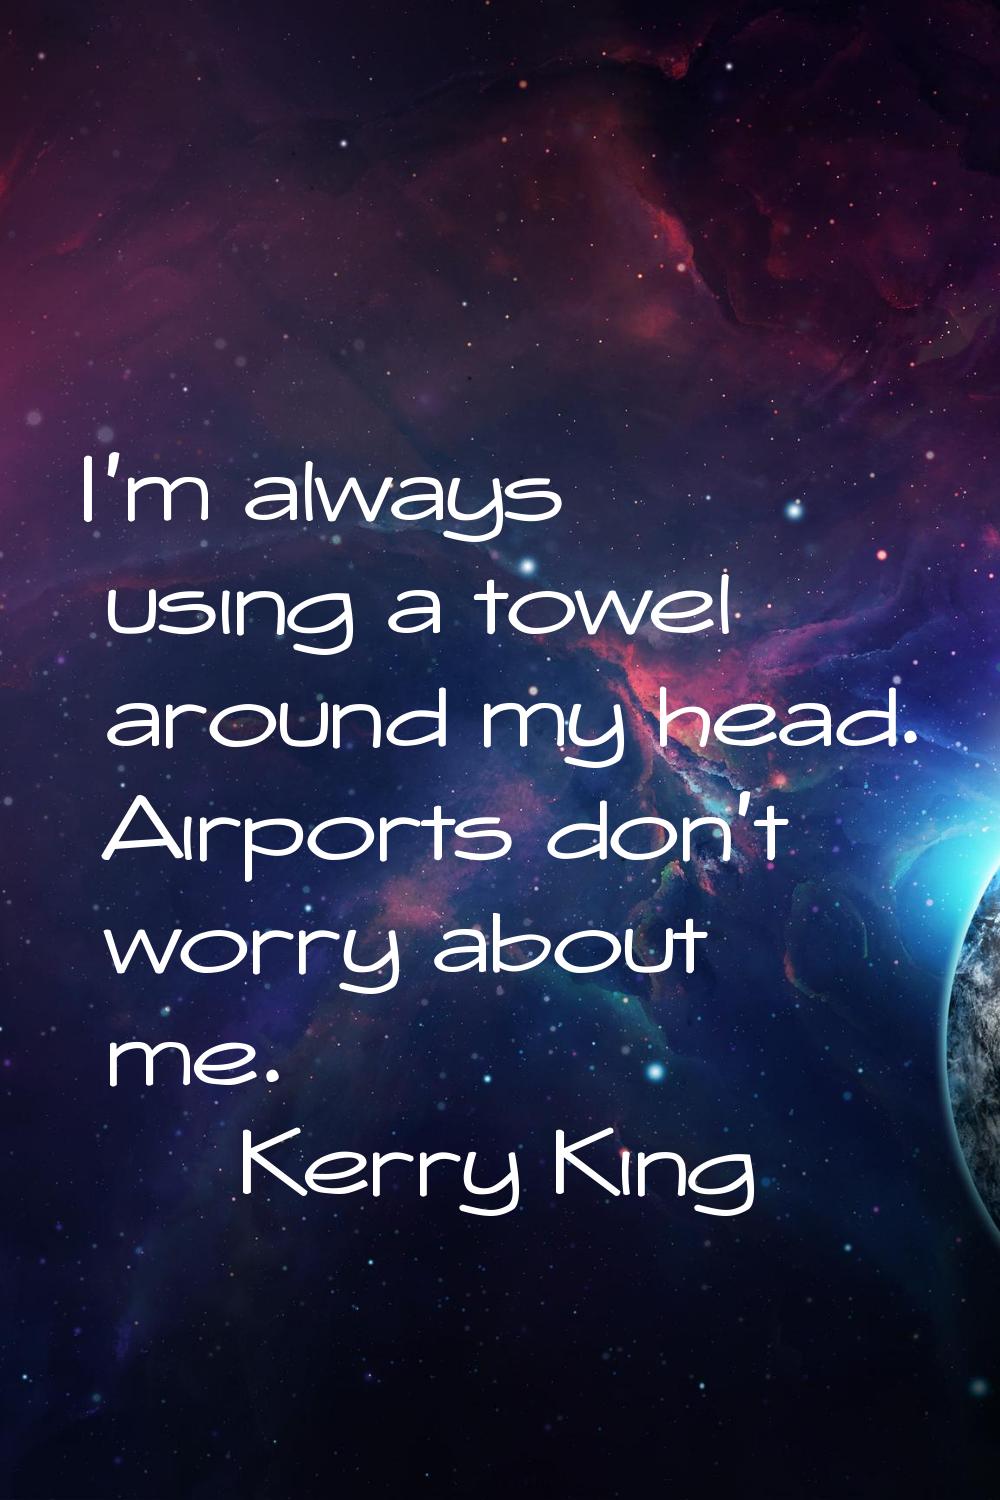 I'm always using a towel around my head. Airports don't worry about me.